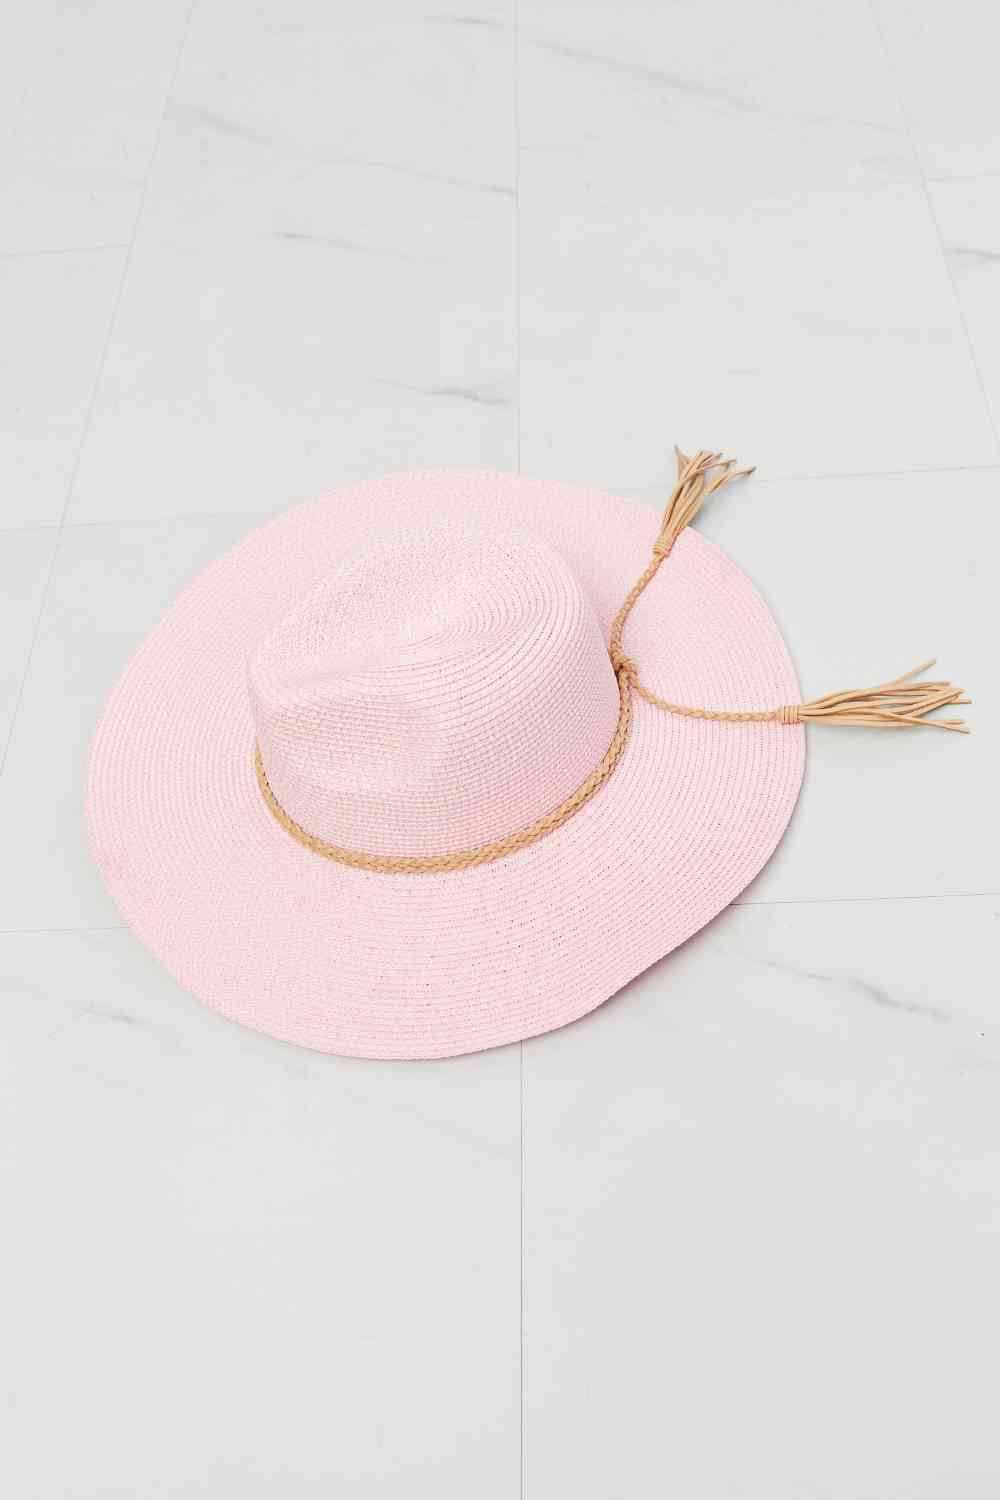 Fame Route To Paradise Straw Hat - lolaluxeshop